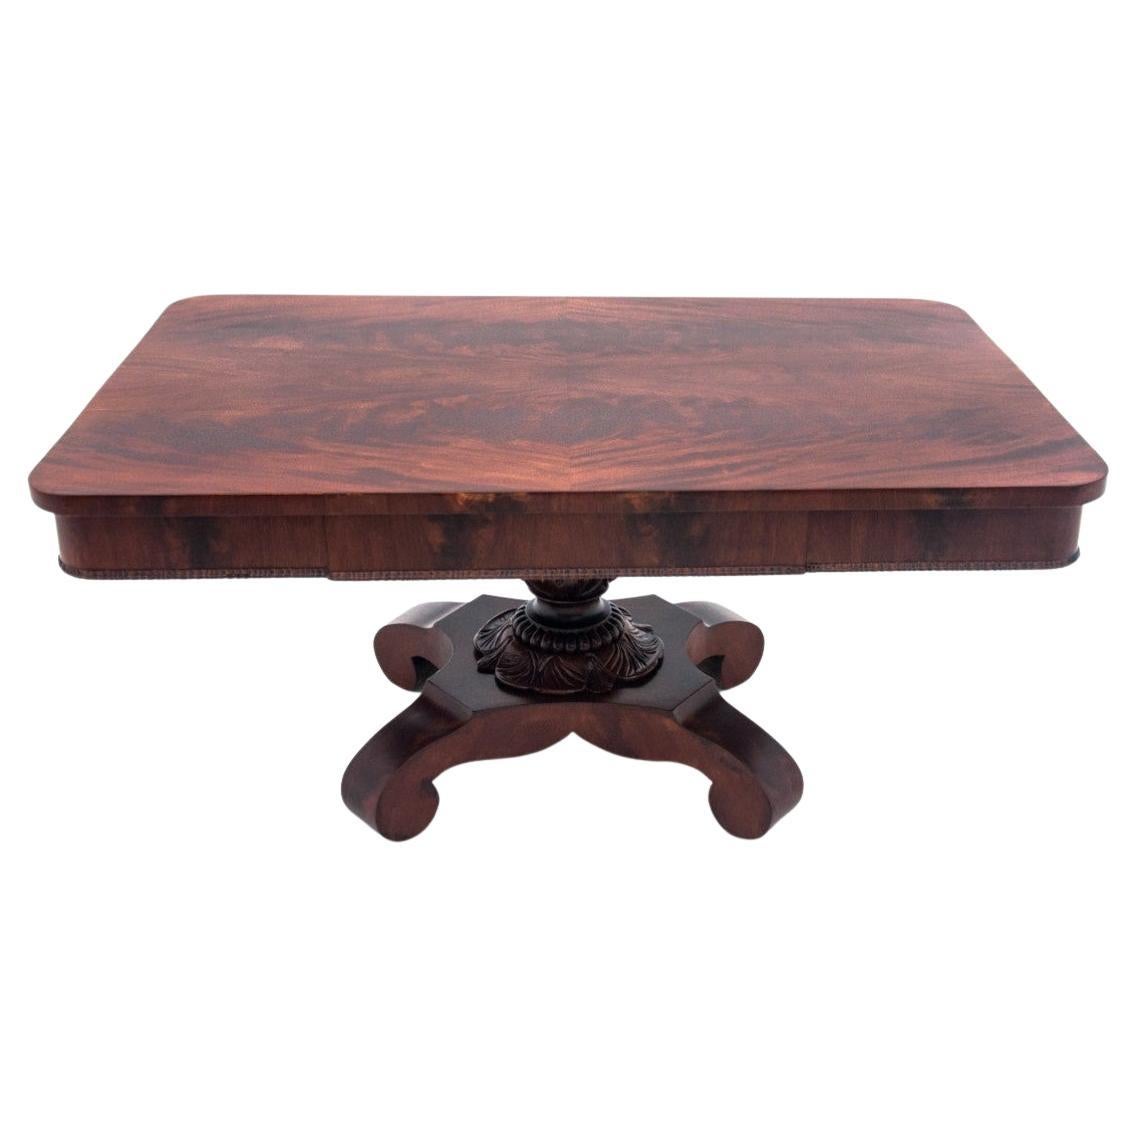 Antique center table, Northern Europe, late 19th century.